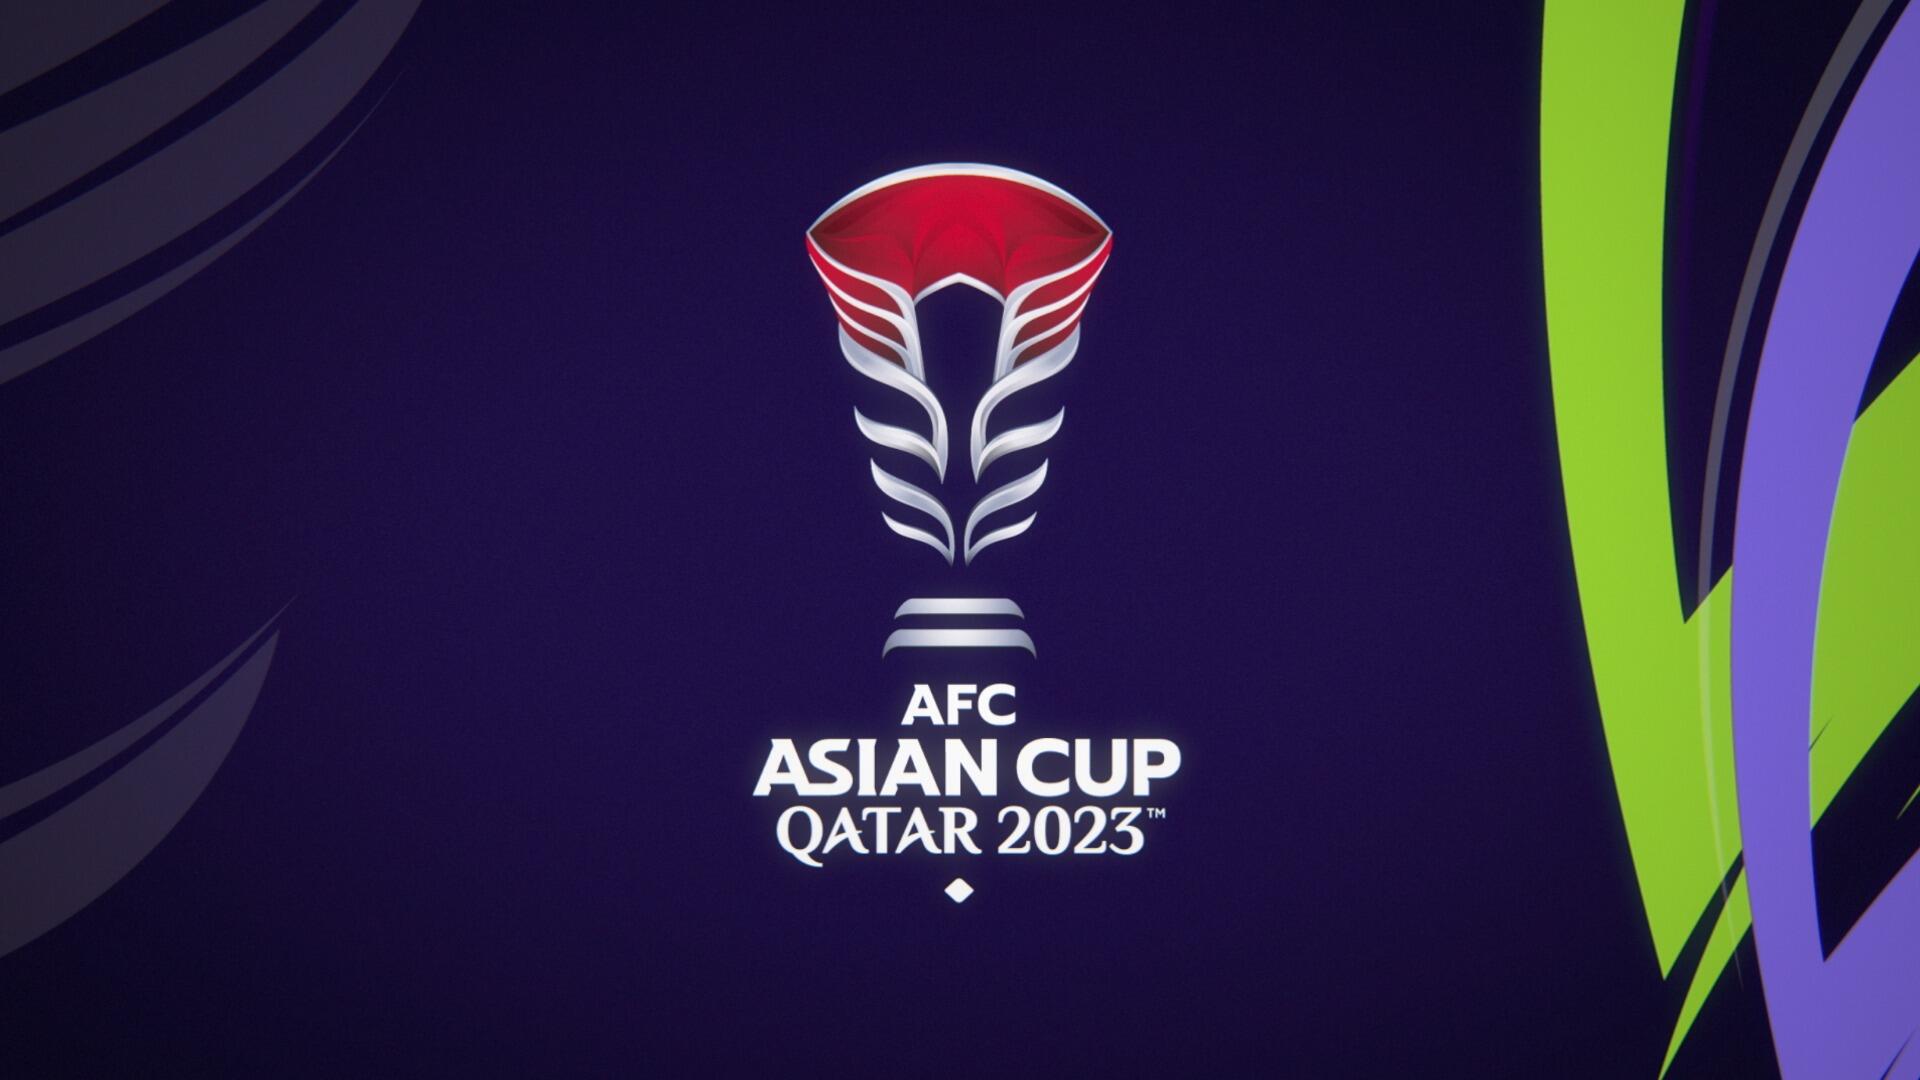 The draw of AFC Asian Cup Qatar 2023